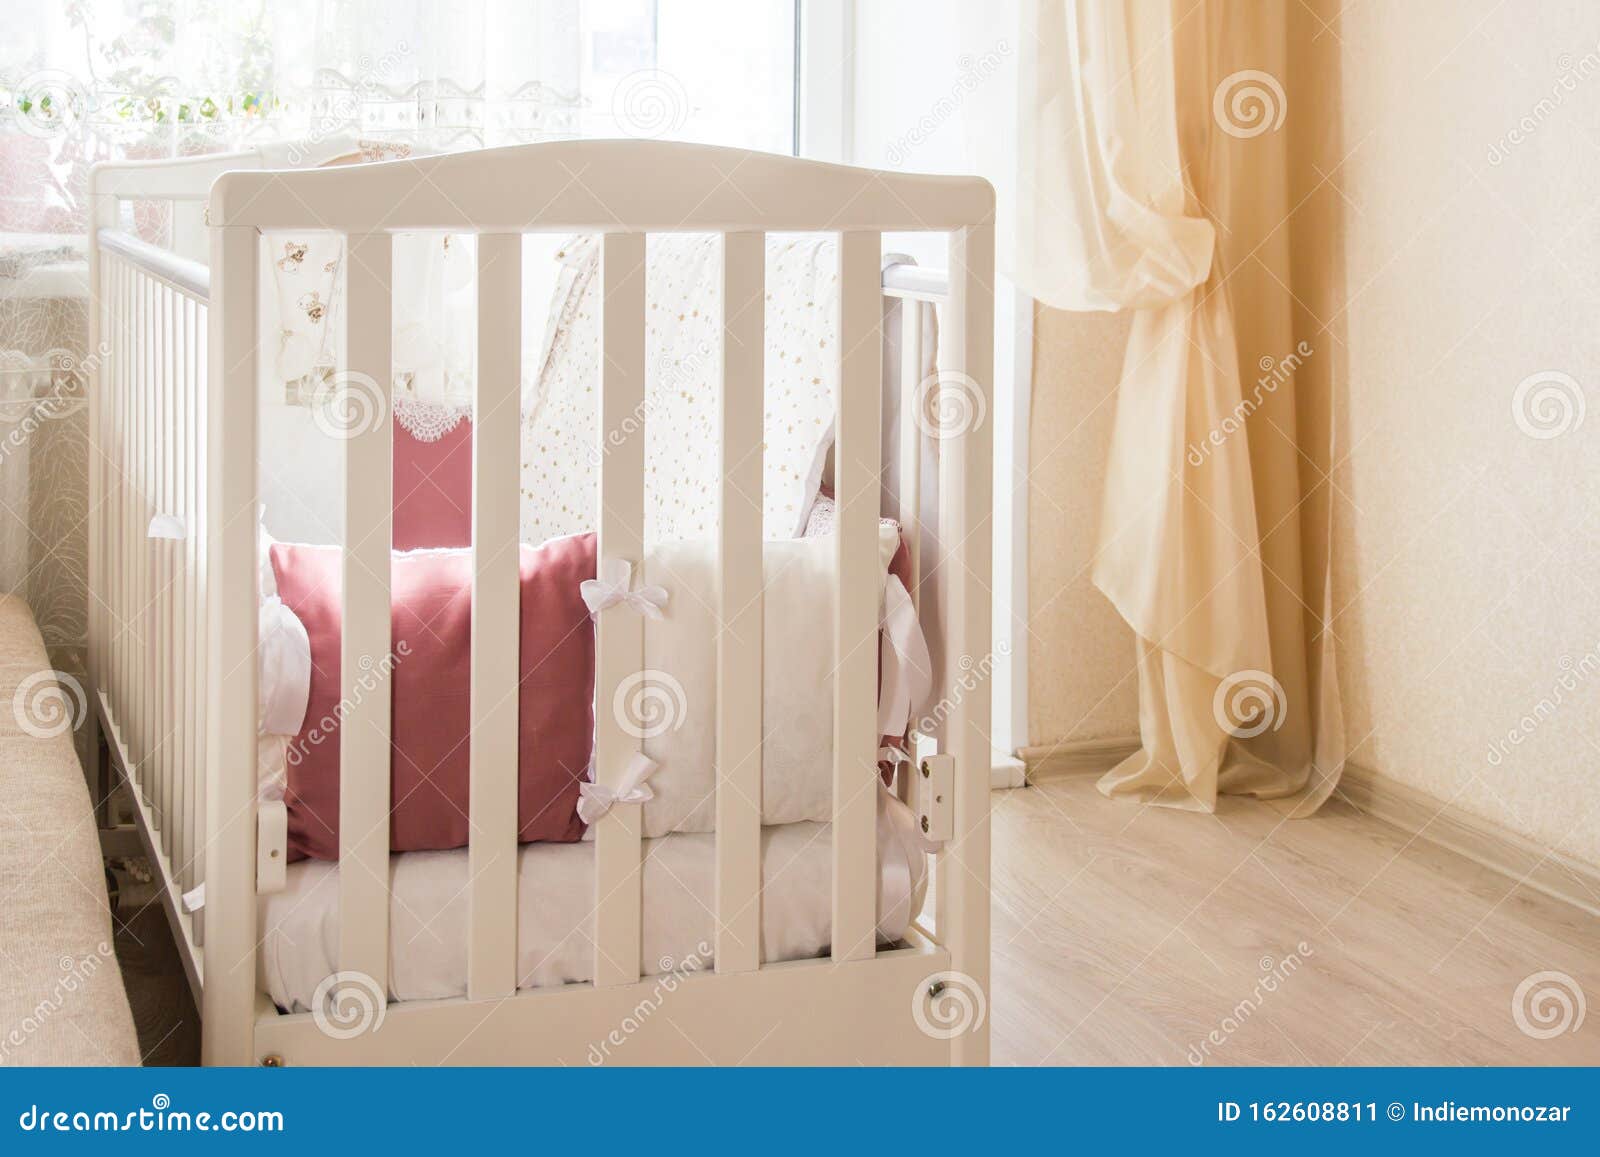 baby movable bed